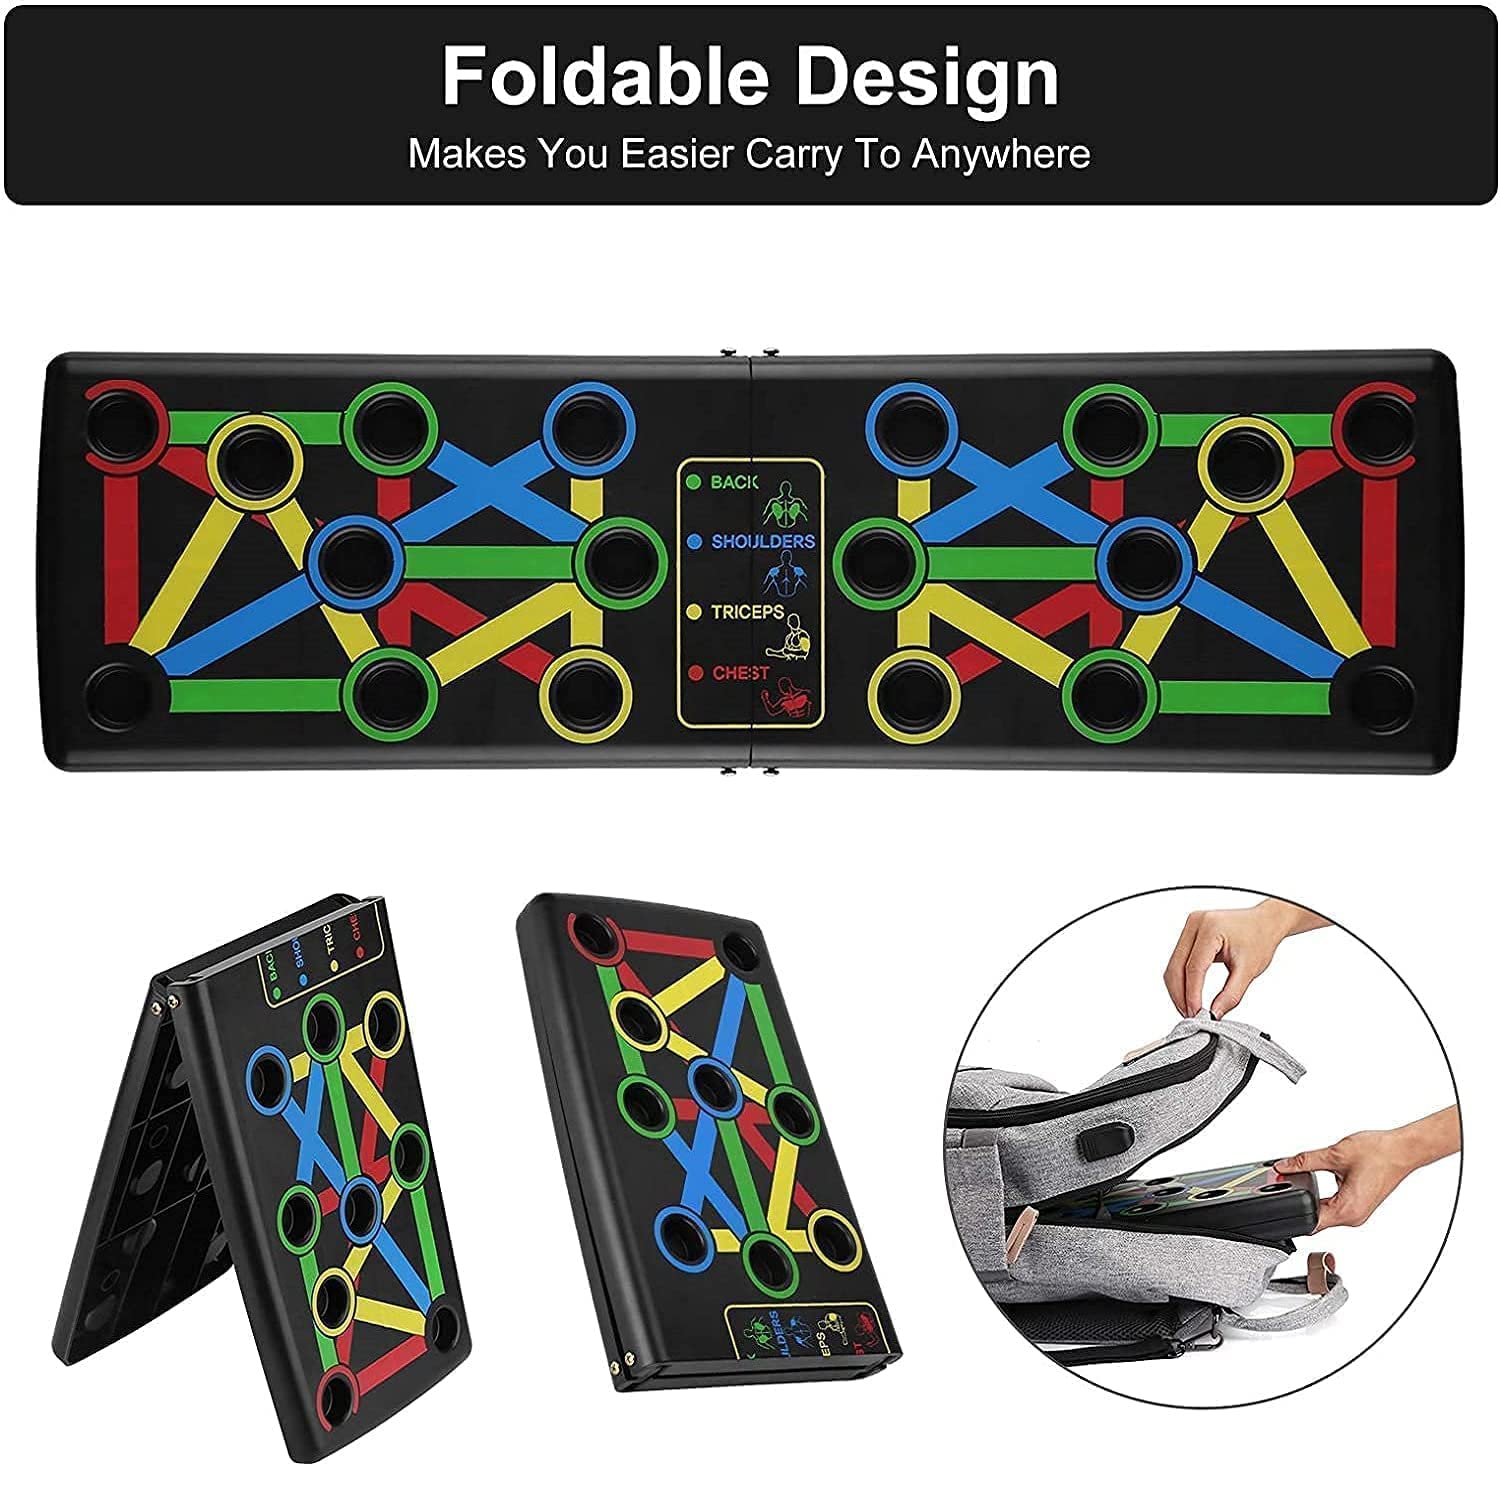 Foldable Push-Up Board 14 in 1 Multi-Function Pushup Bracket Rack Dips  Stand Body Building Fitness Exercise Tools – Store 4 Hope